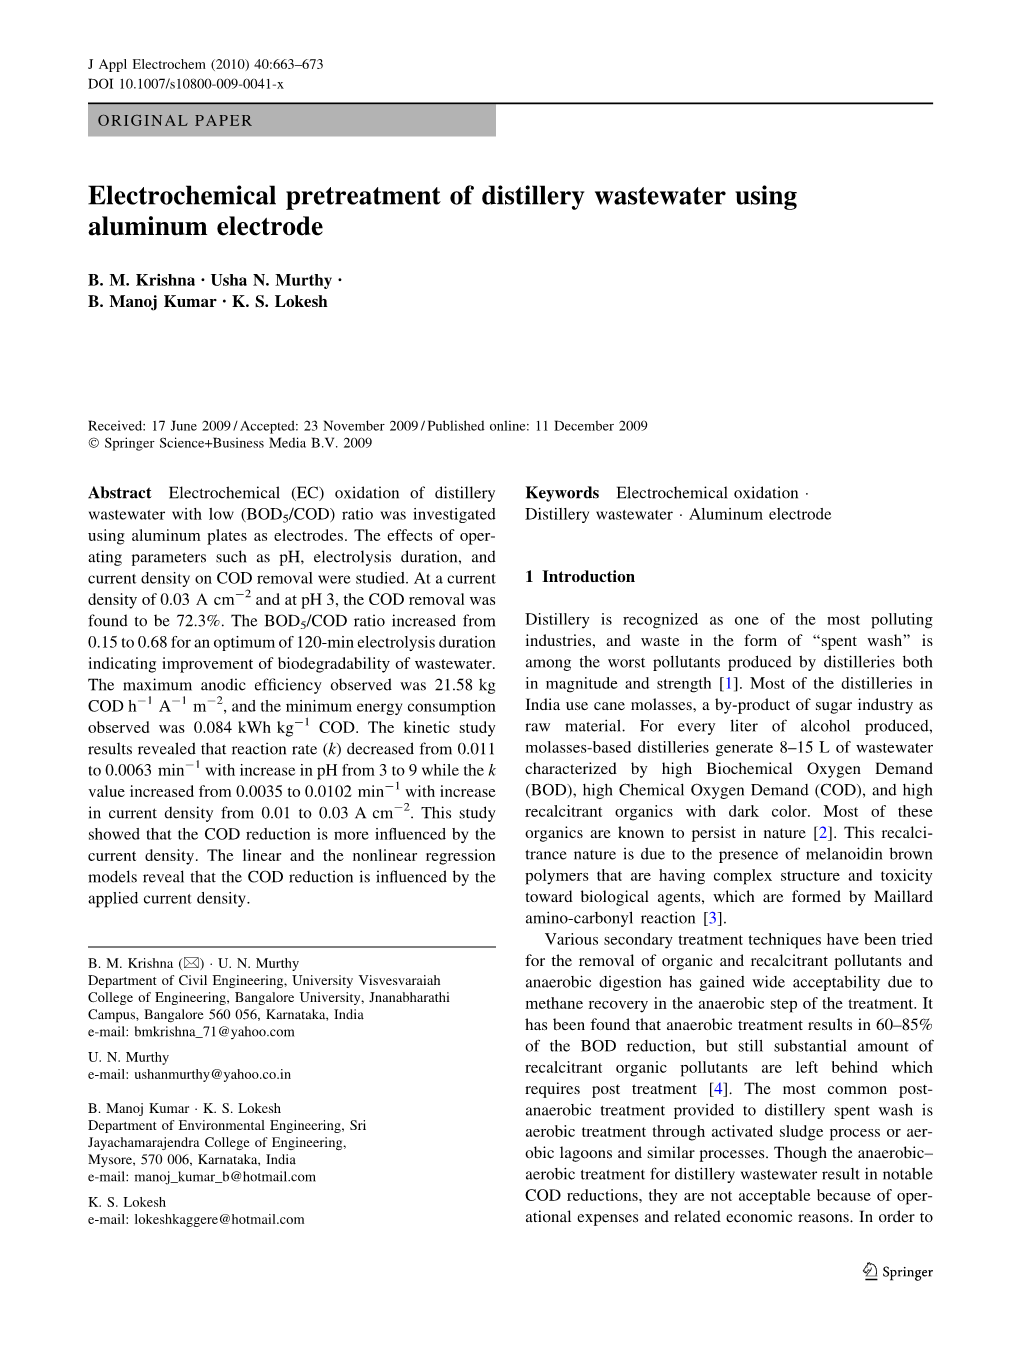 Electrochemical Pretreatment of Distillery Wastewater Using Aluminum Electrode